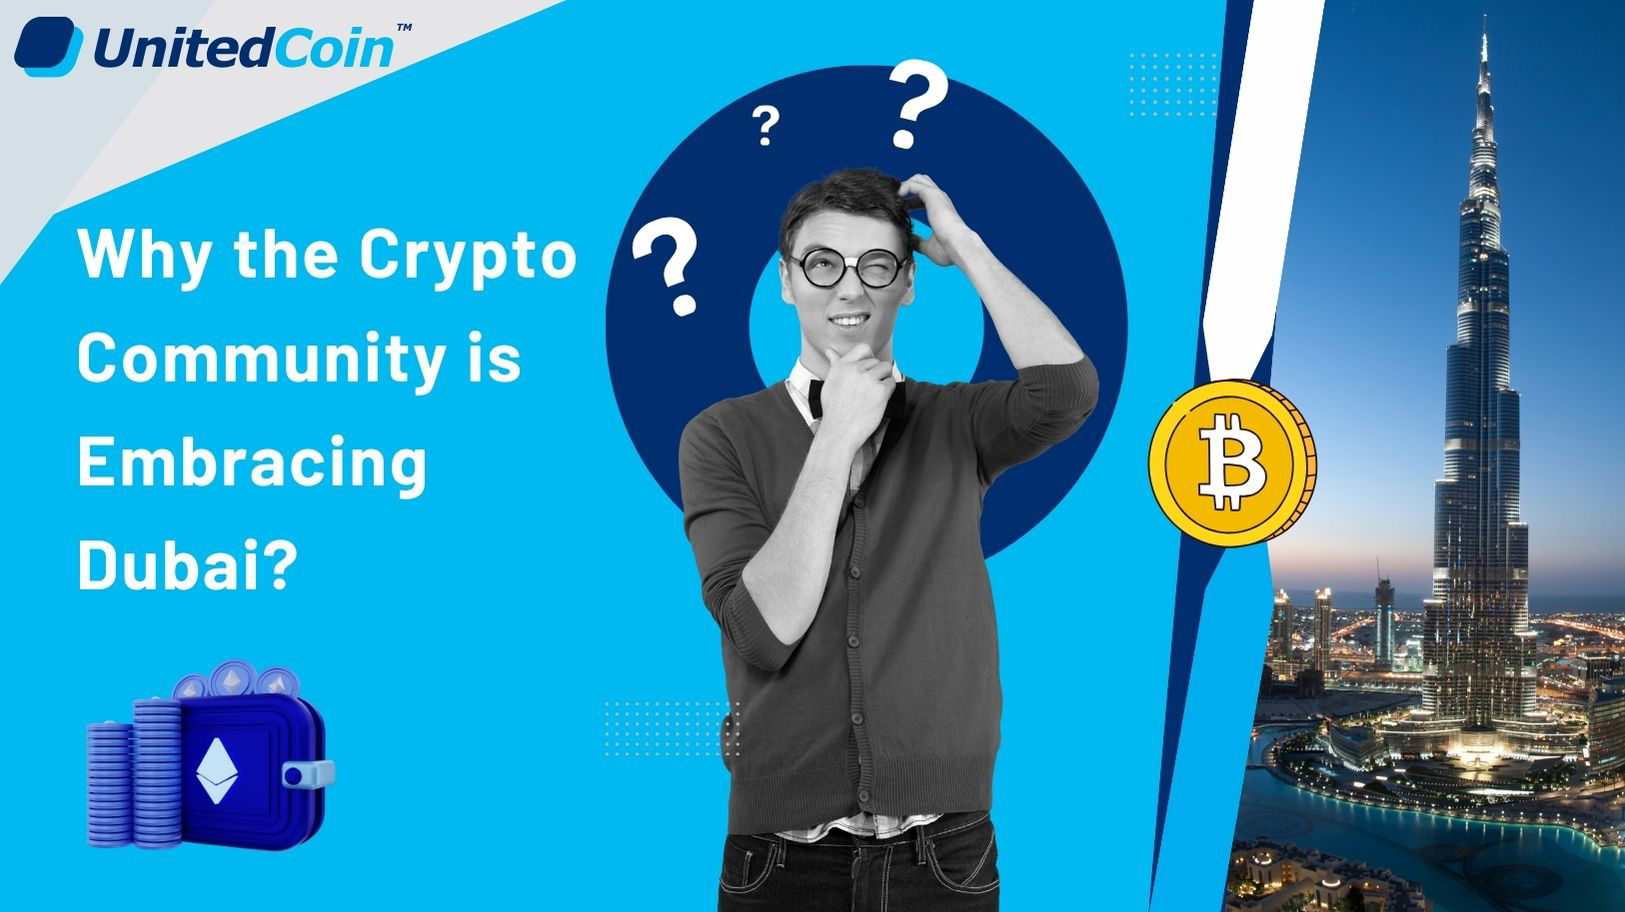 Why the Crypto Community is Embracing Dubai?